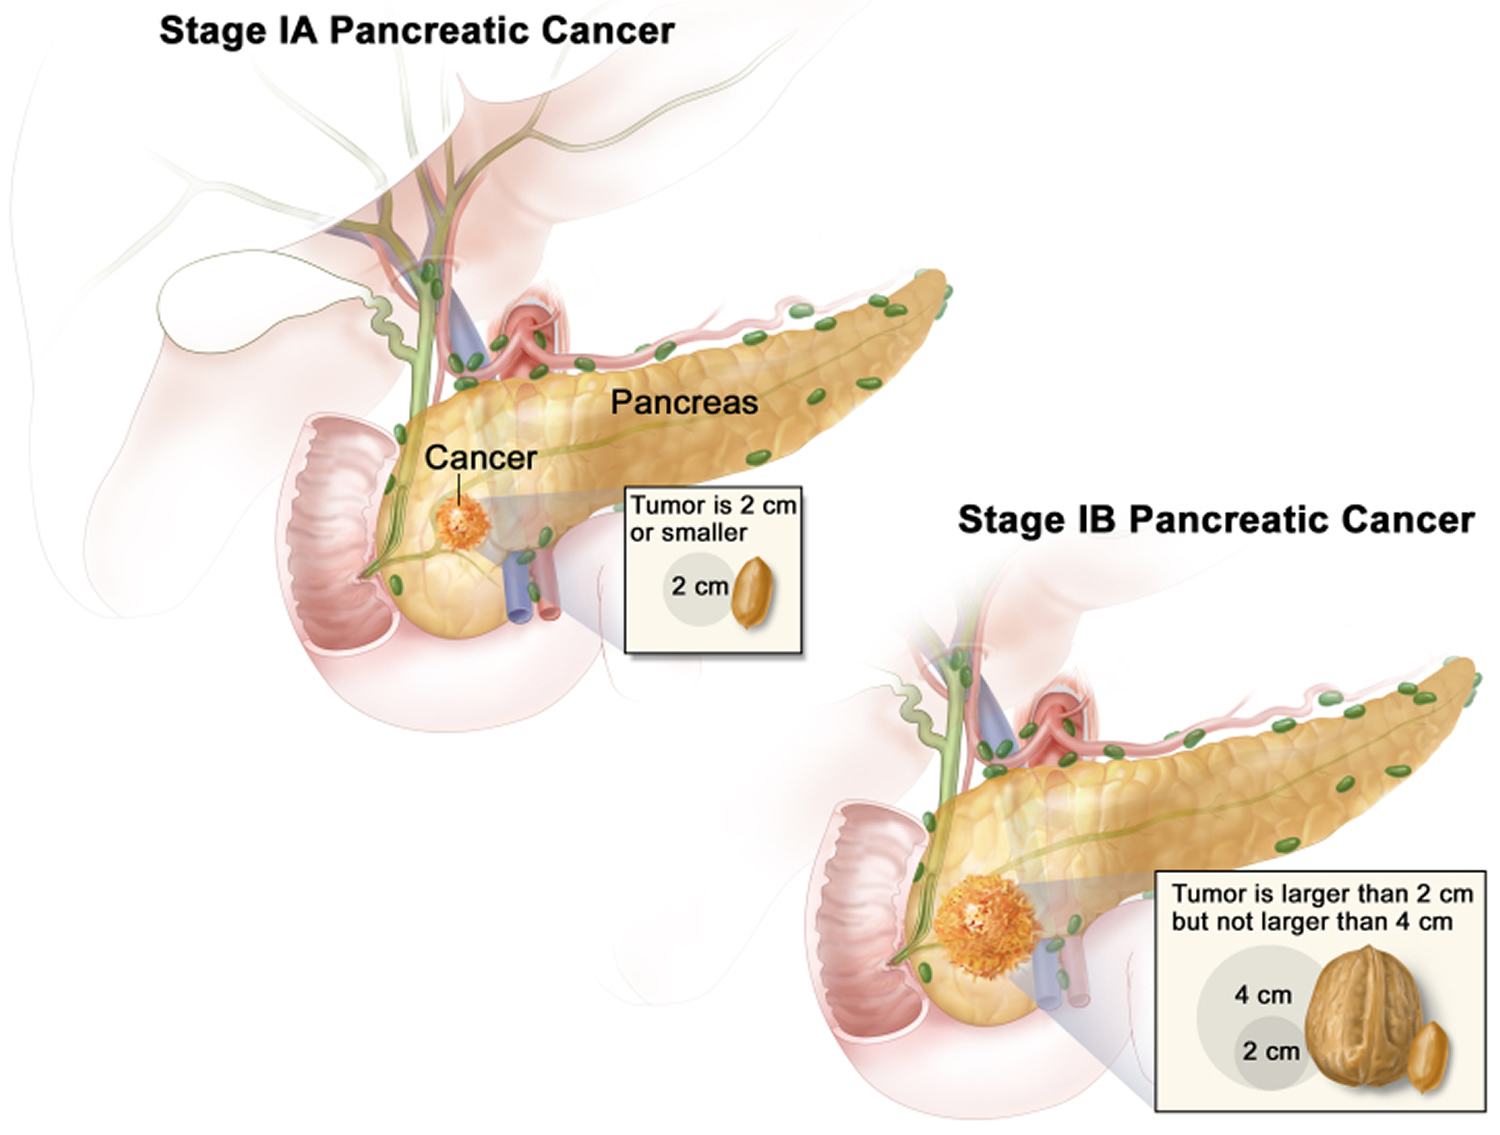 Stage 1 pancreatic cancer